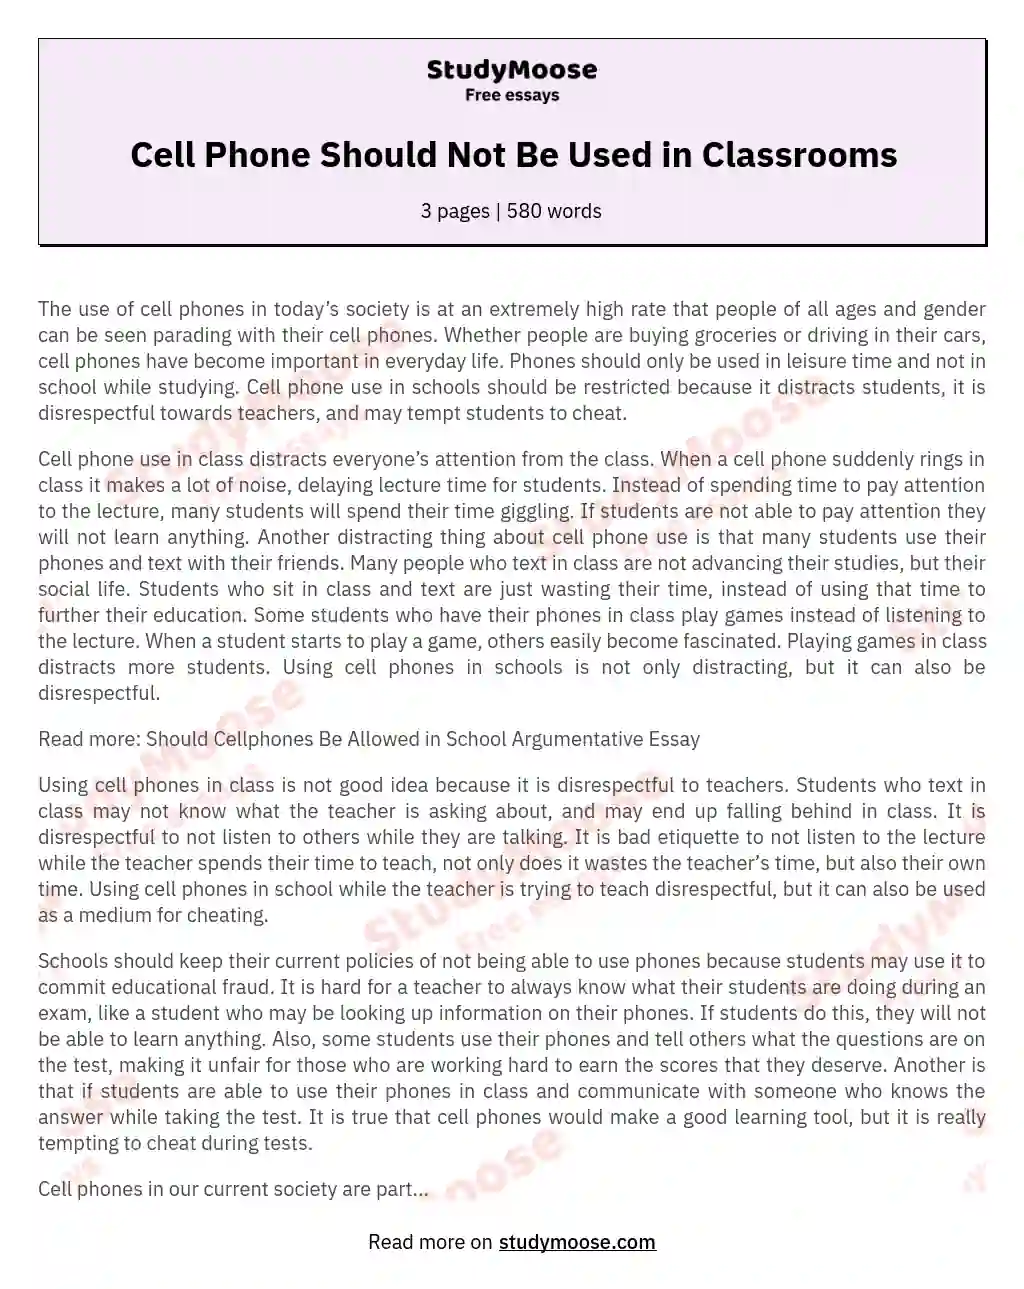 Cell Phone Should Not Be Used in Classrooms essay